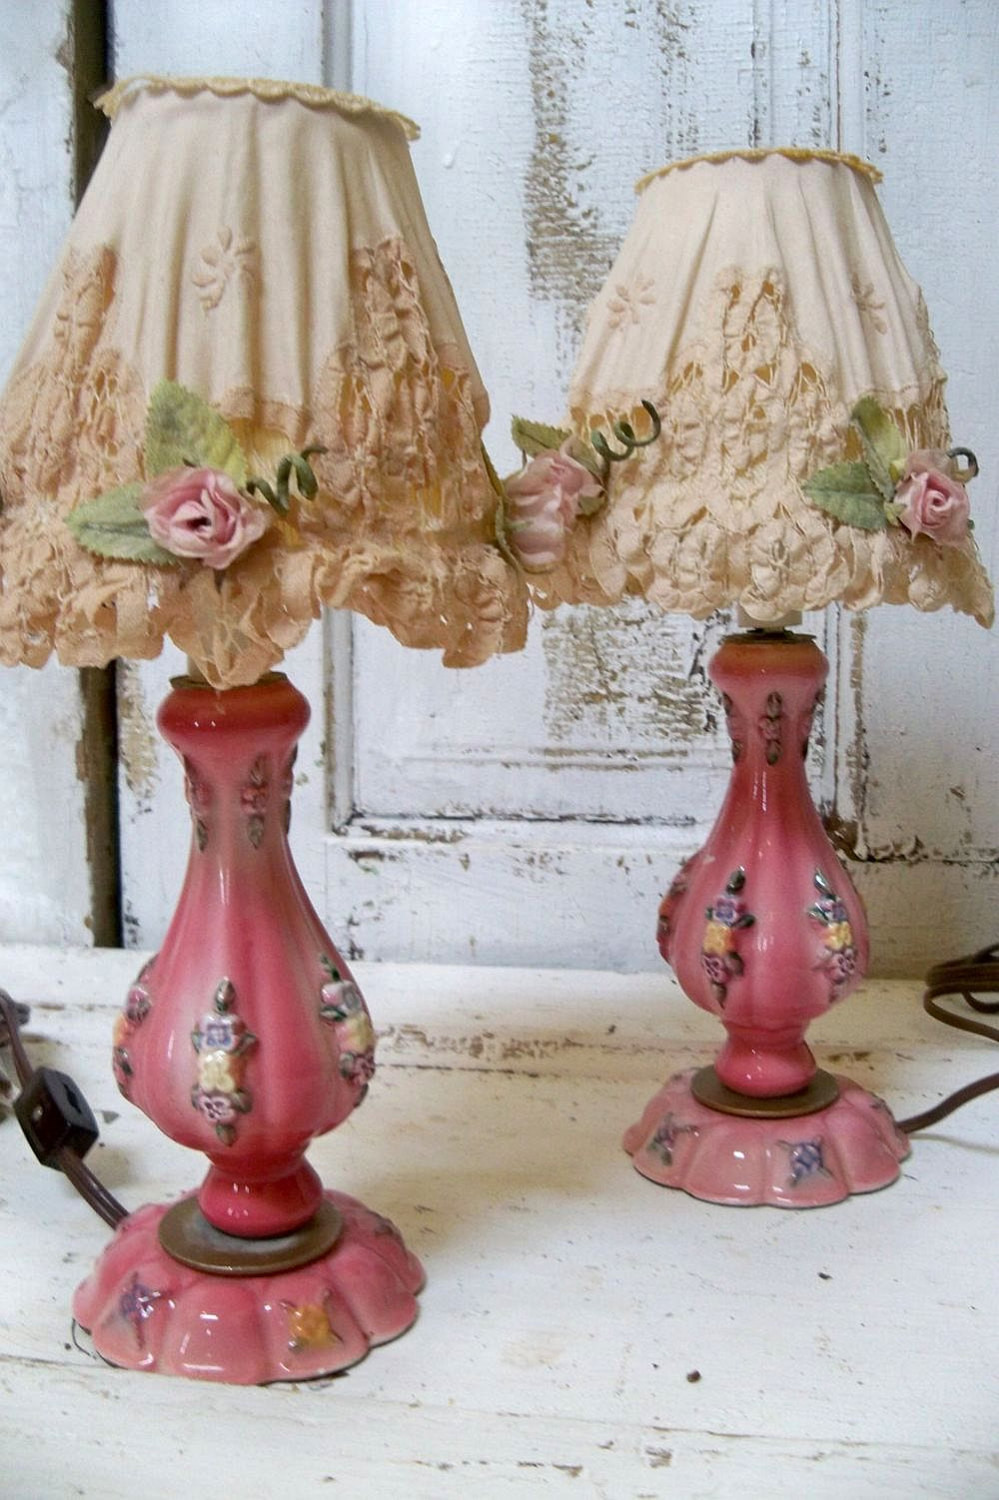 Shabby Chic Bedroom Lamp
 Shabby chic pink lamp set with embellished shades vintage